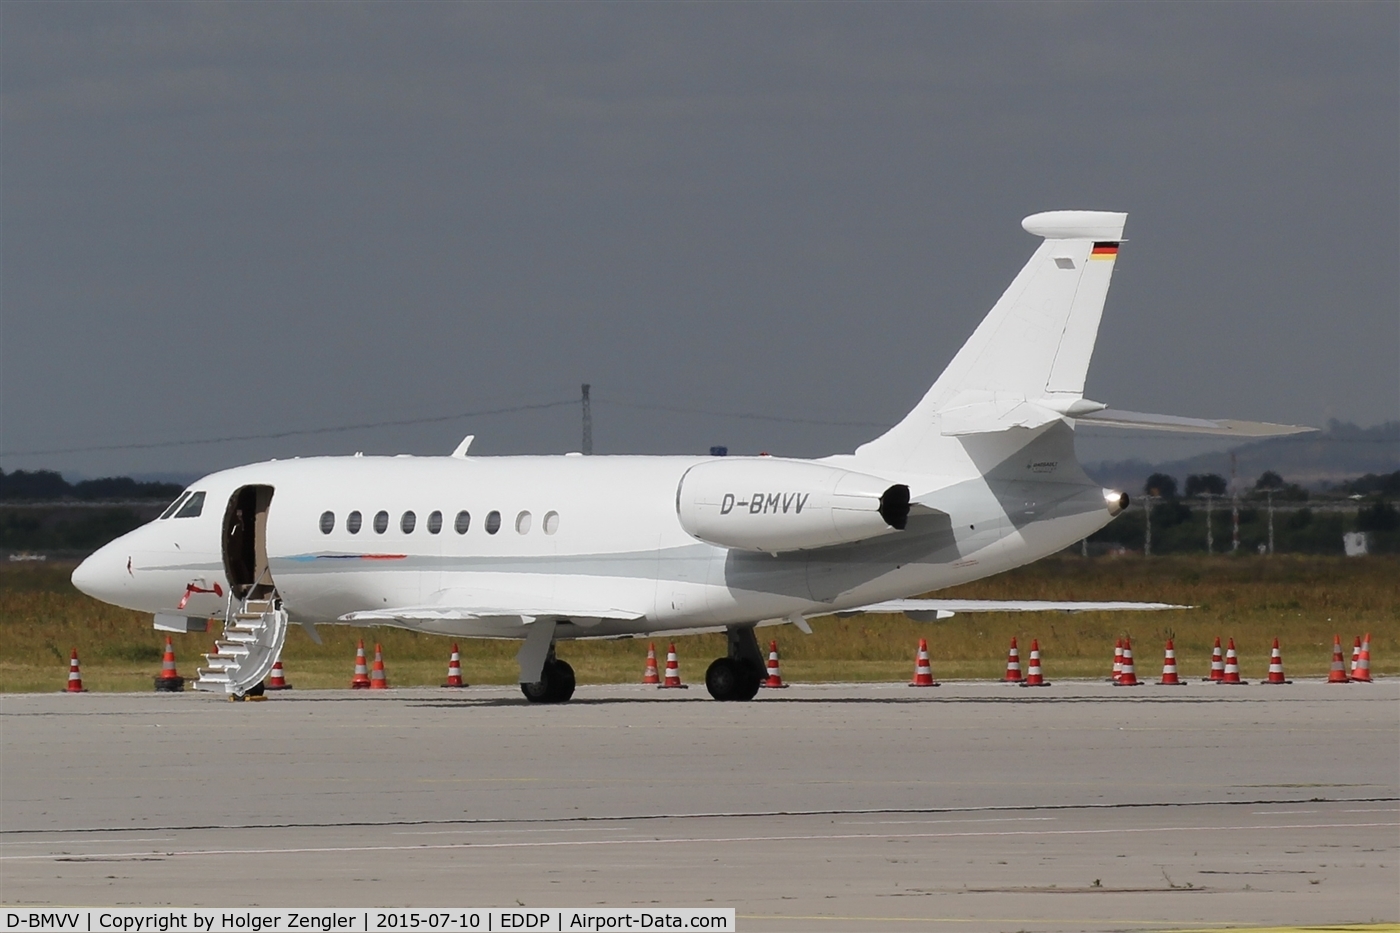 D-BMVV, 2005 Dassault Falcon 2000EX C/N 42, In that case BMVV means BMW. The passengers are on duty in Leipzig branch of bavarian automaker....